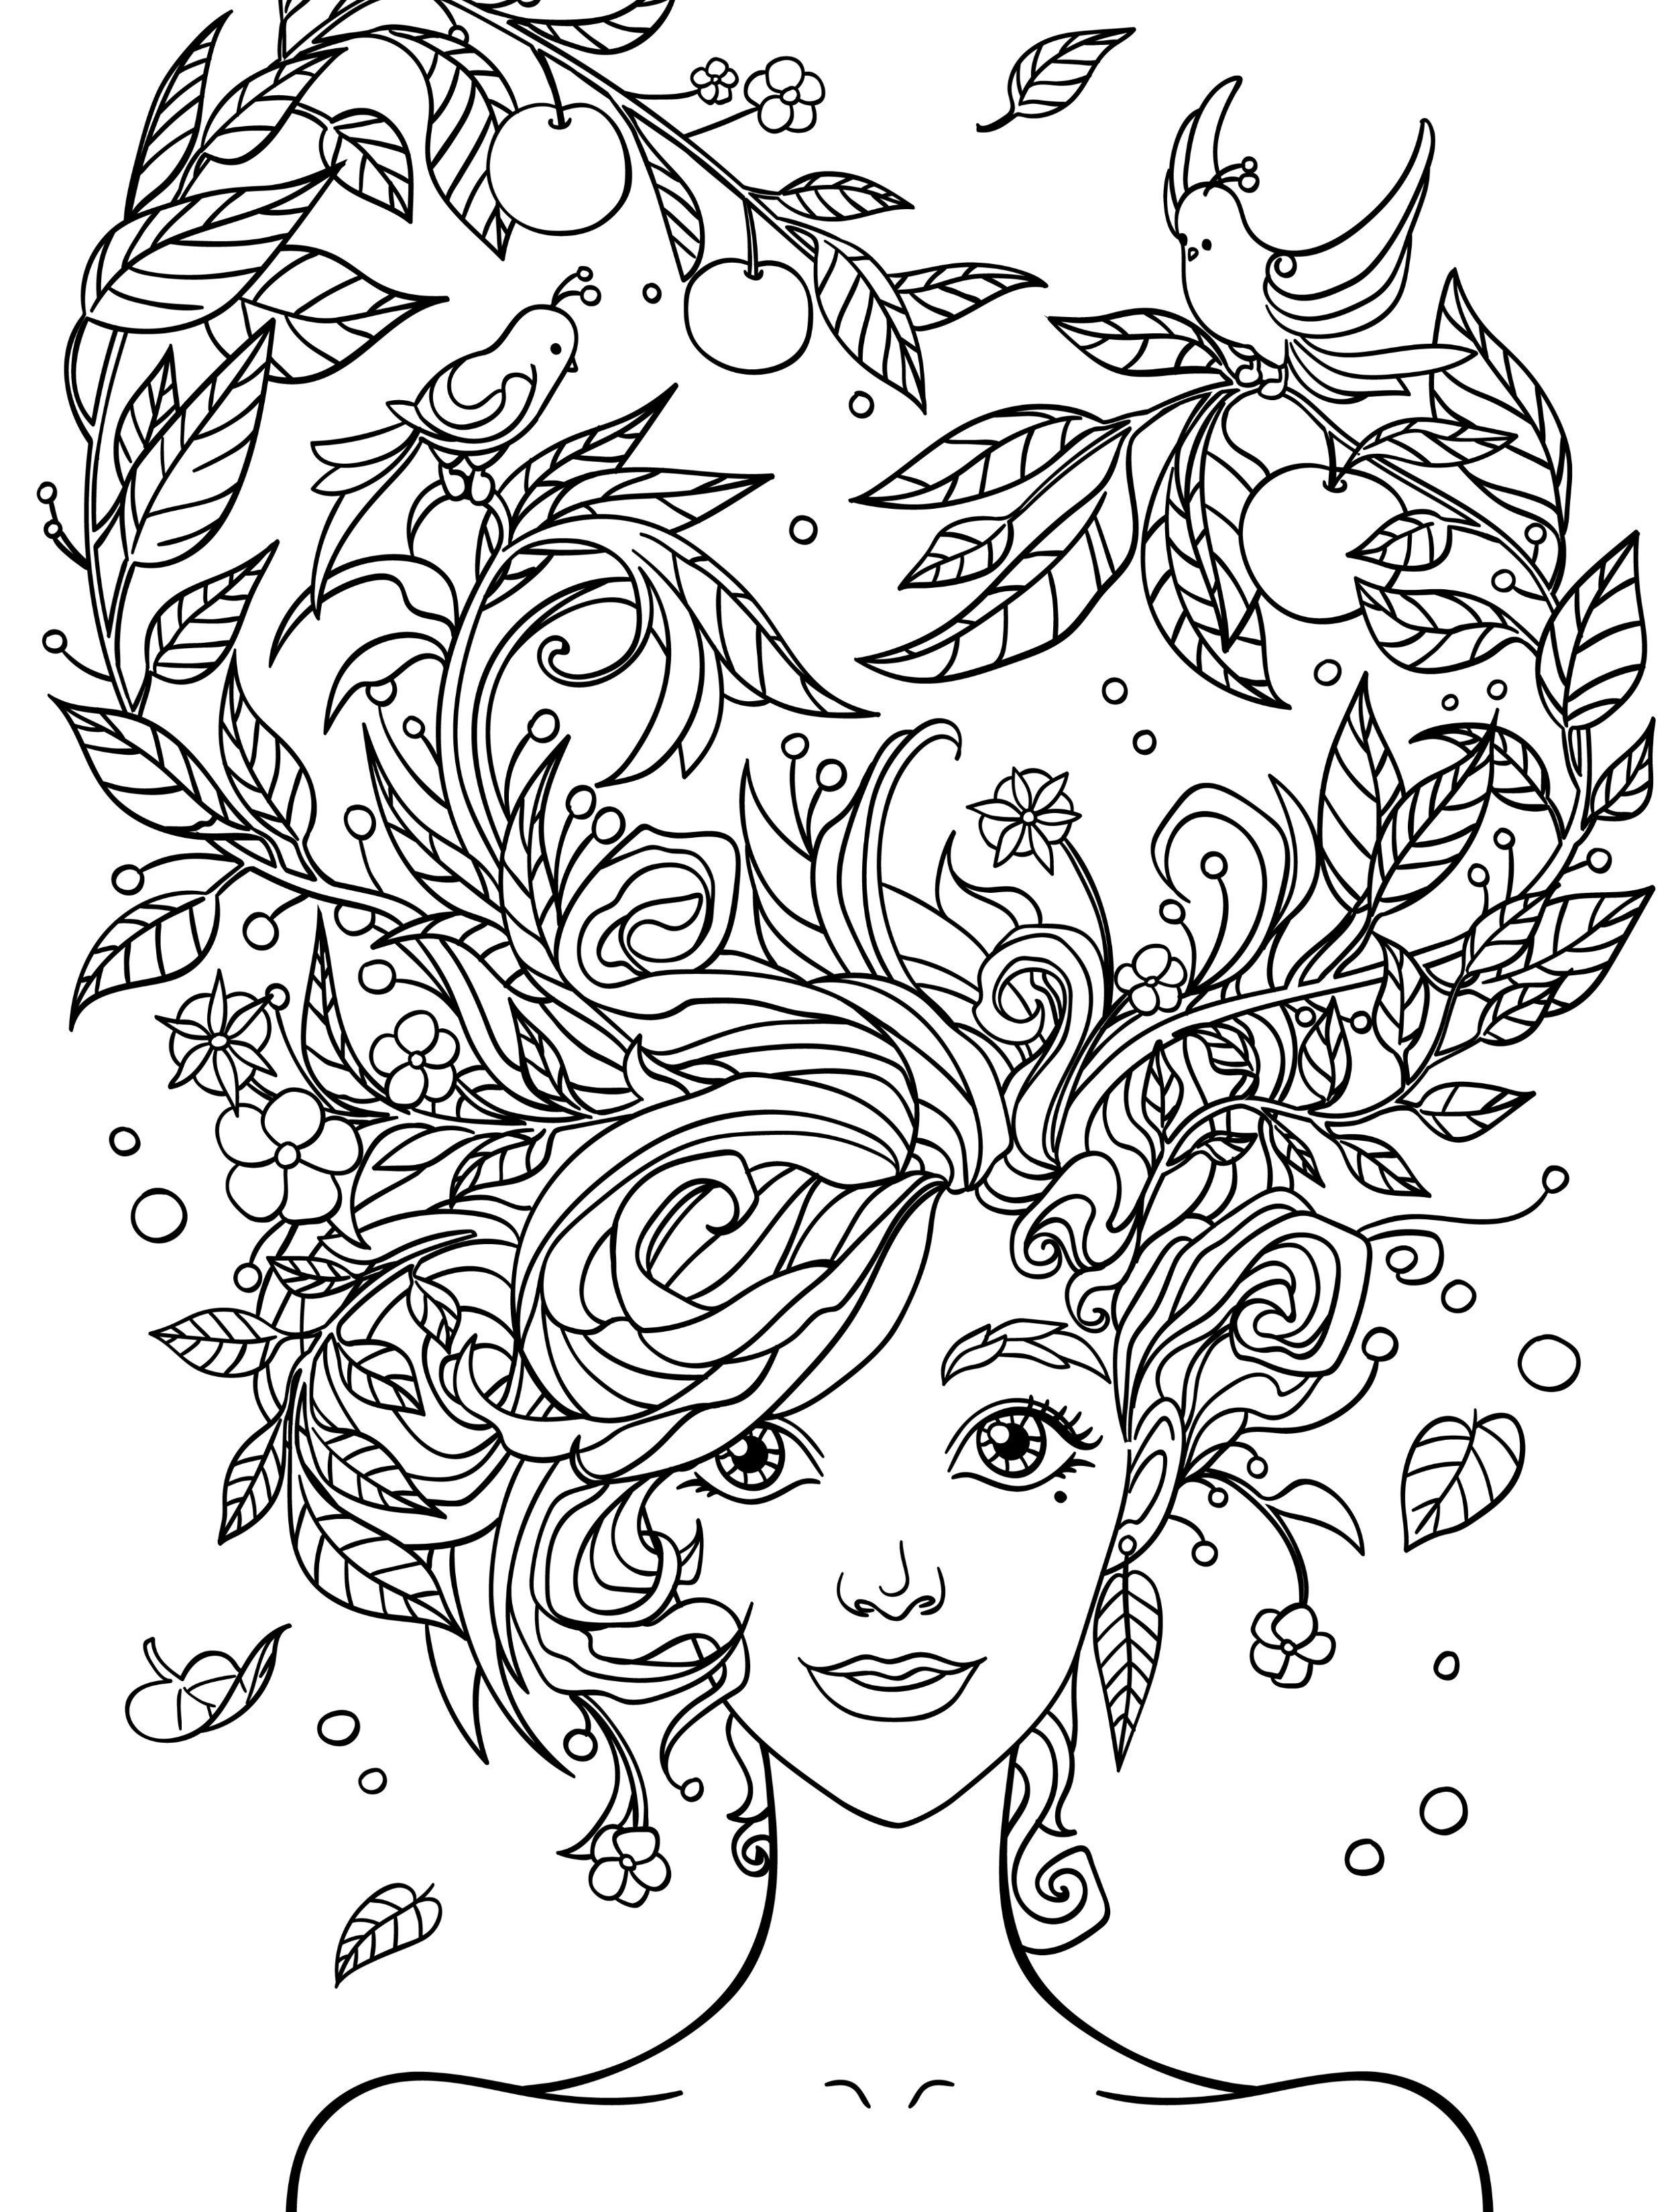 Pretty Coloring Pages For Adults Free Printable | People Coloring - Free Printable Coloring Pages For Adults